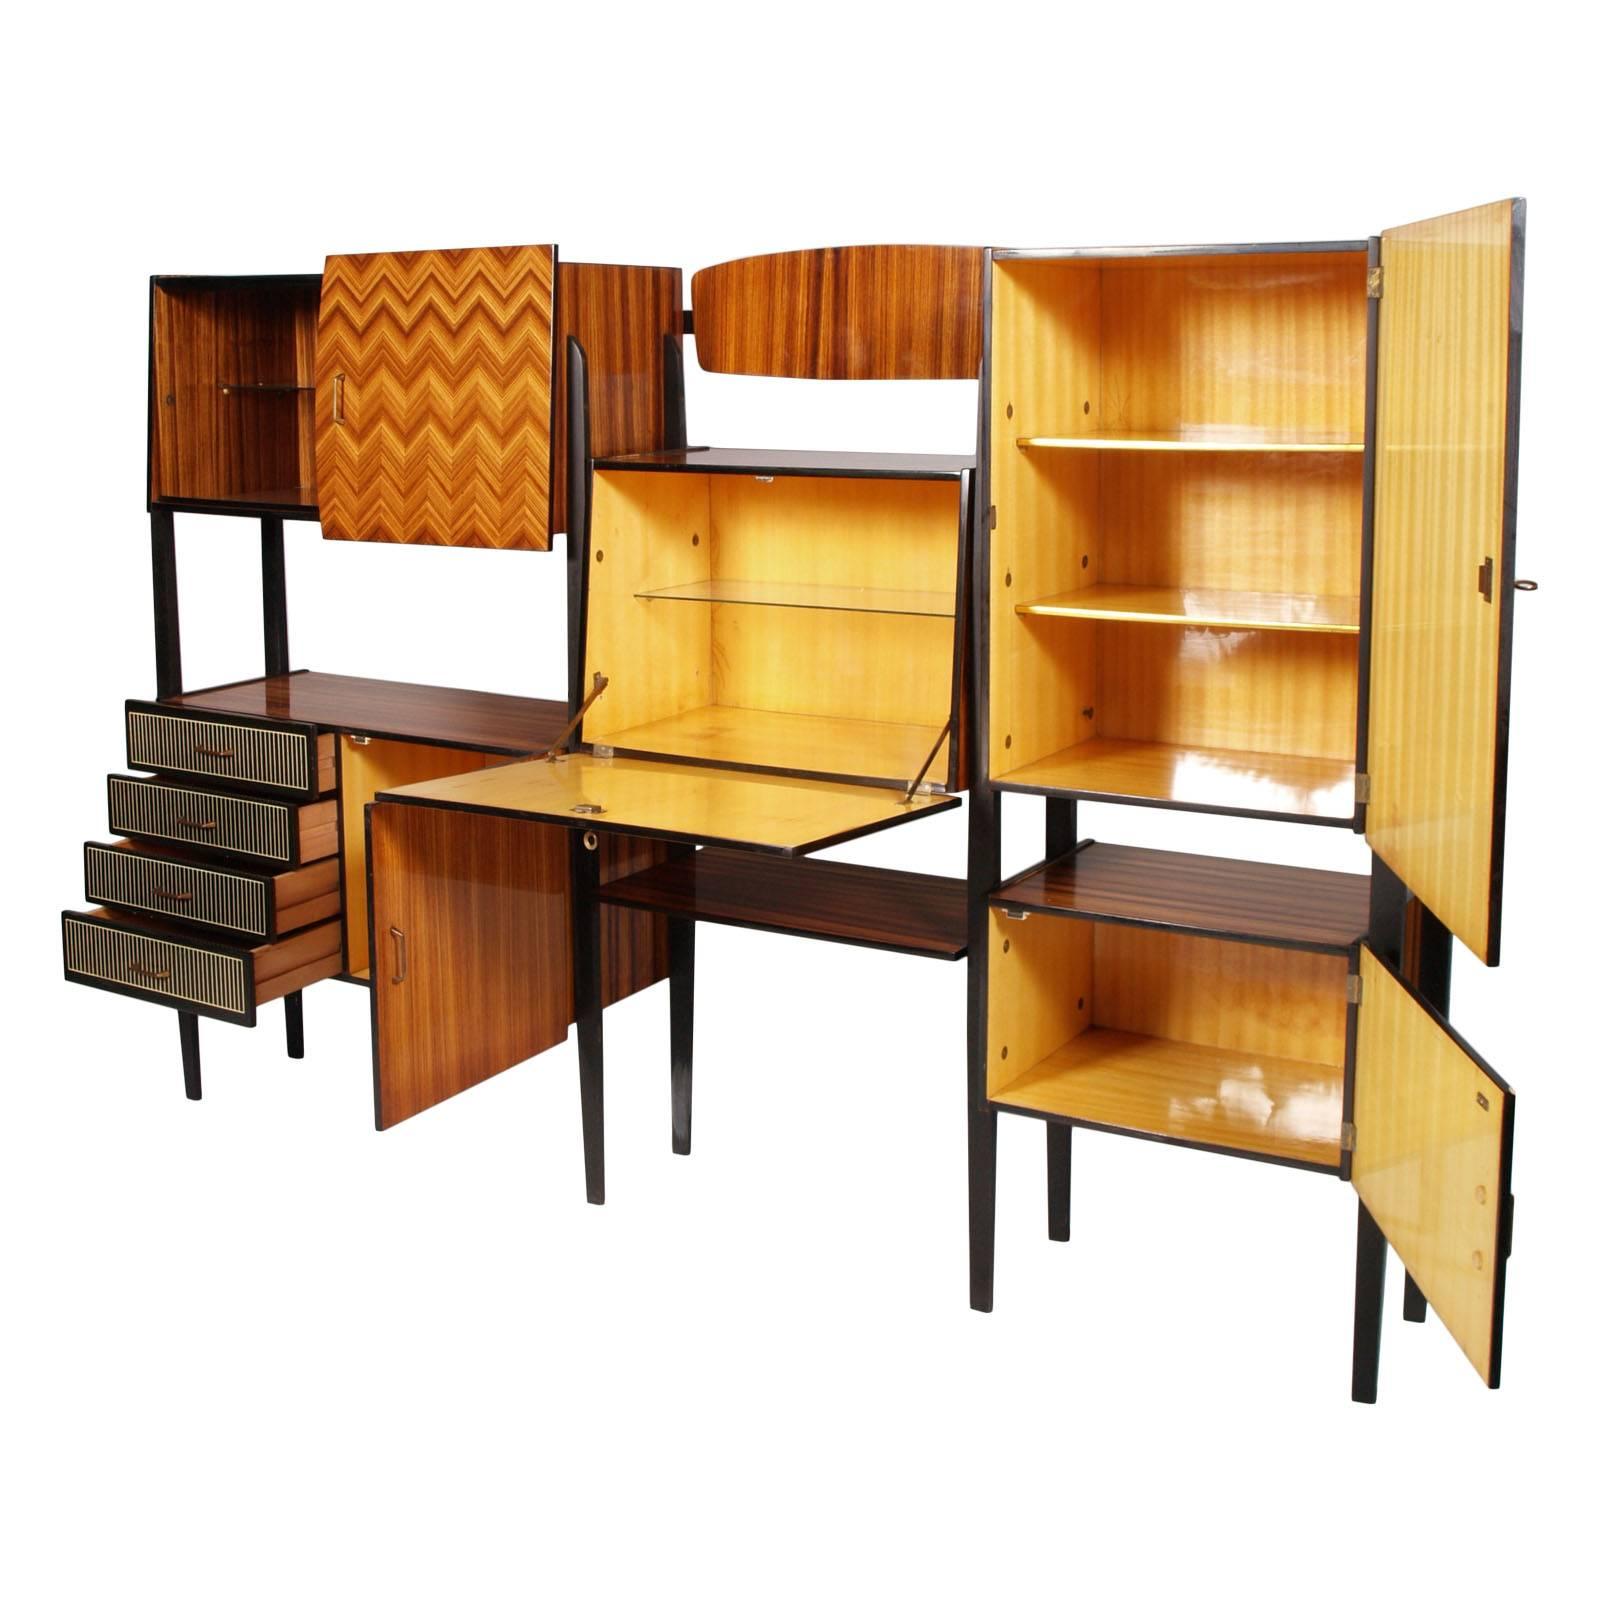 1950s Cantu bookshelf, sideboard, Osvaldo Borsani style, with ebonized walnut structure. External veneer in lacquered rosewood; interior in lacquered maple wood ; Lacquered external surfaces worked in a herringbone pattern with various wood essences